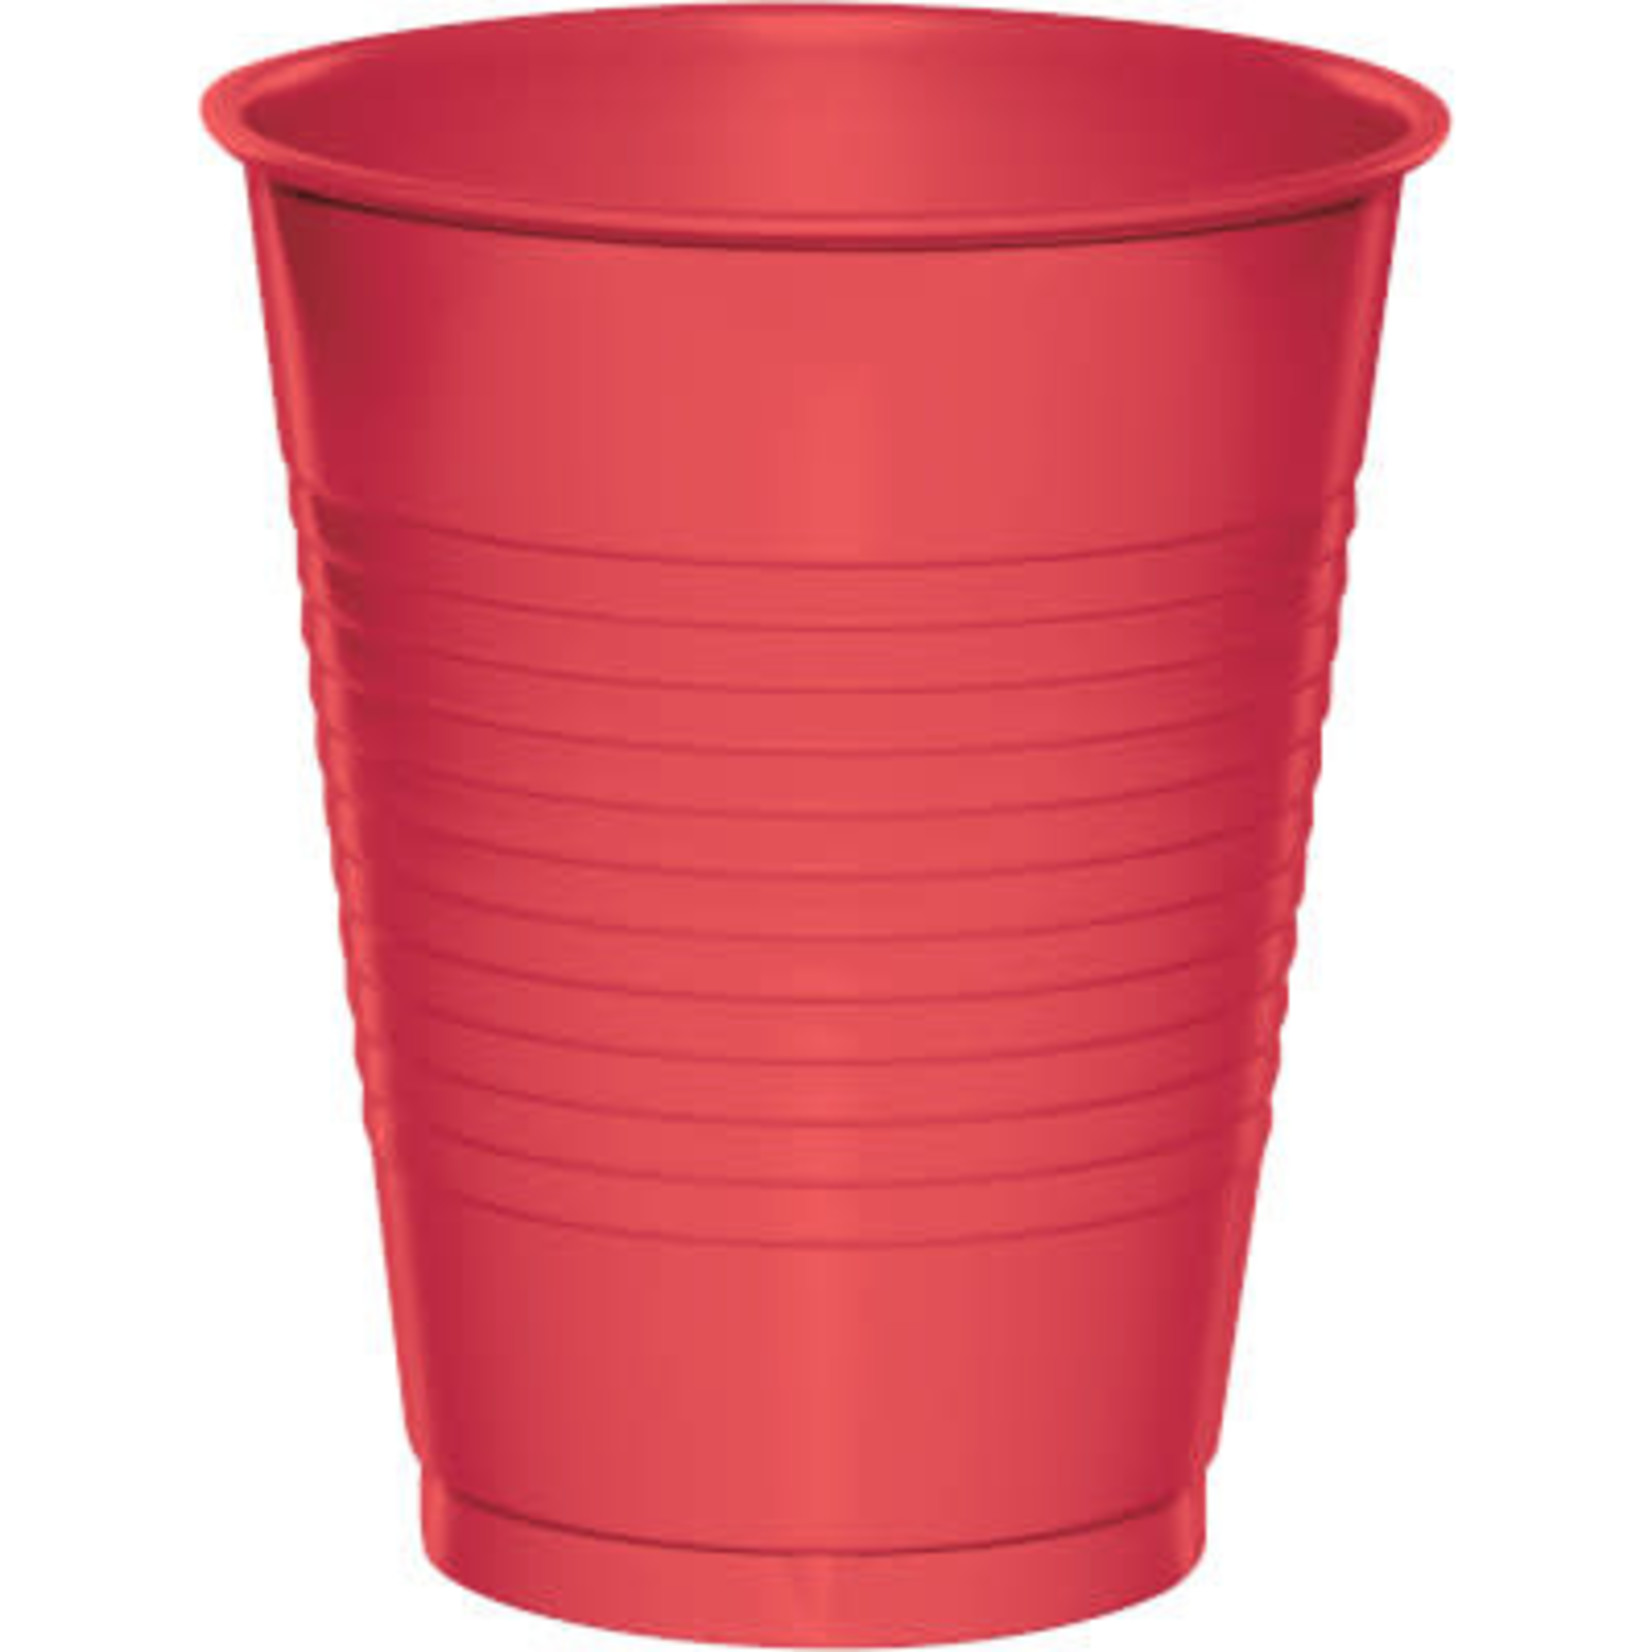 Touch of Color 16oz. Coral Plastic Cups - 20ct.